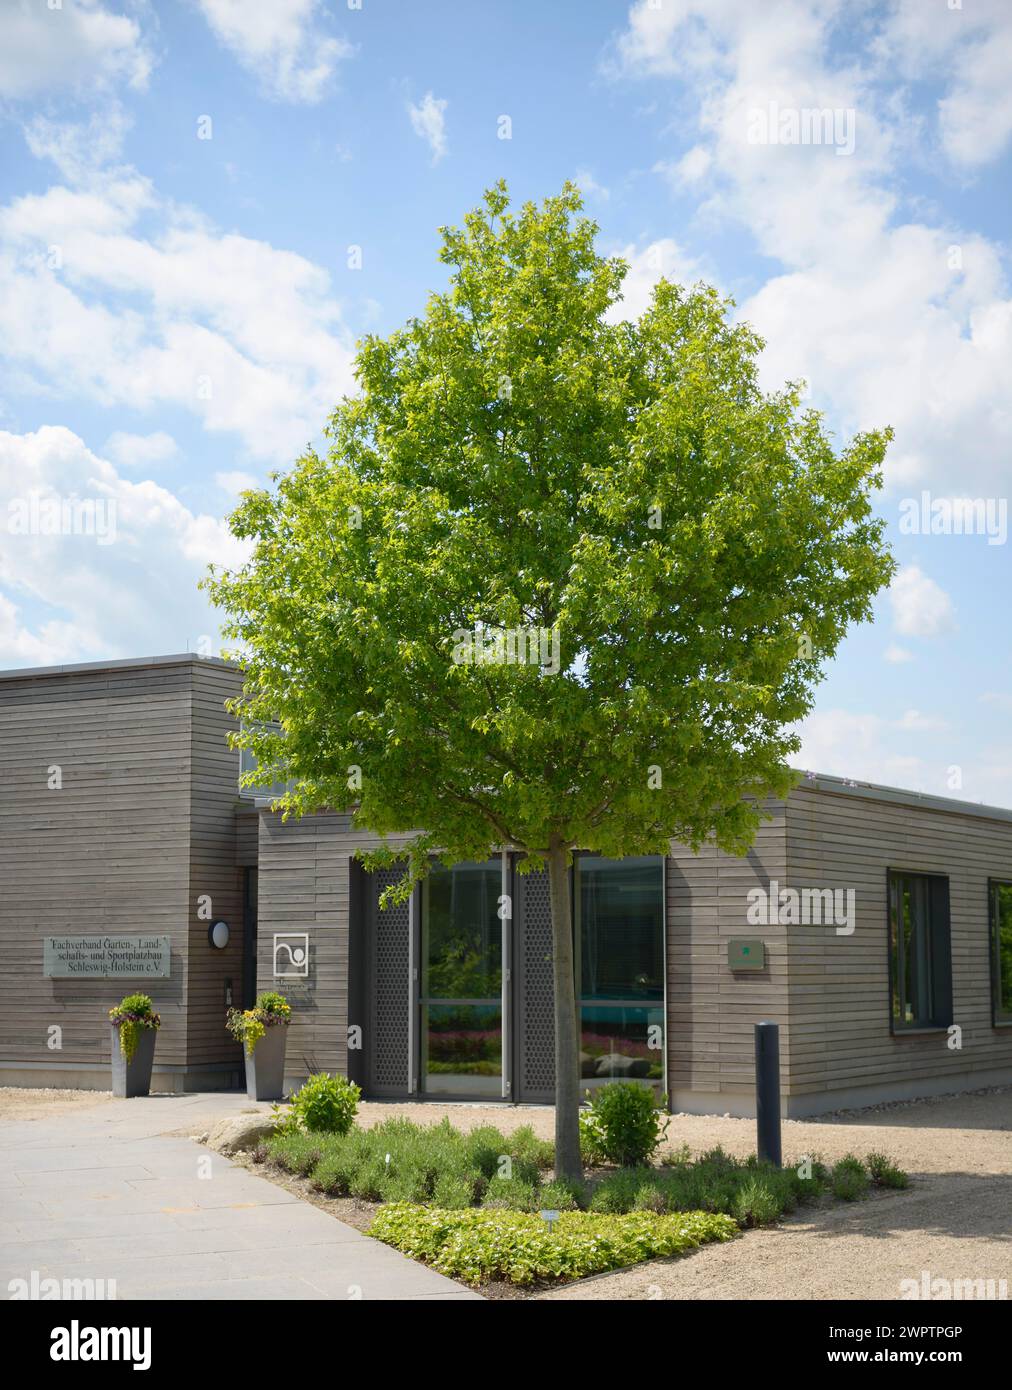 Scarlet oak (Quercus coccinea), Competence Centre for Horticulture, Ellerhoop-Thiensen, Schleswig-Holstein, Germany Stock Photo